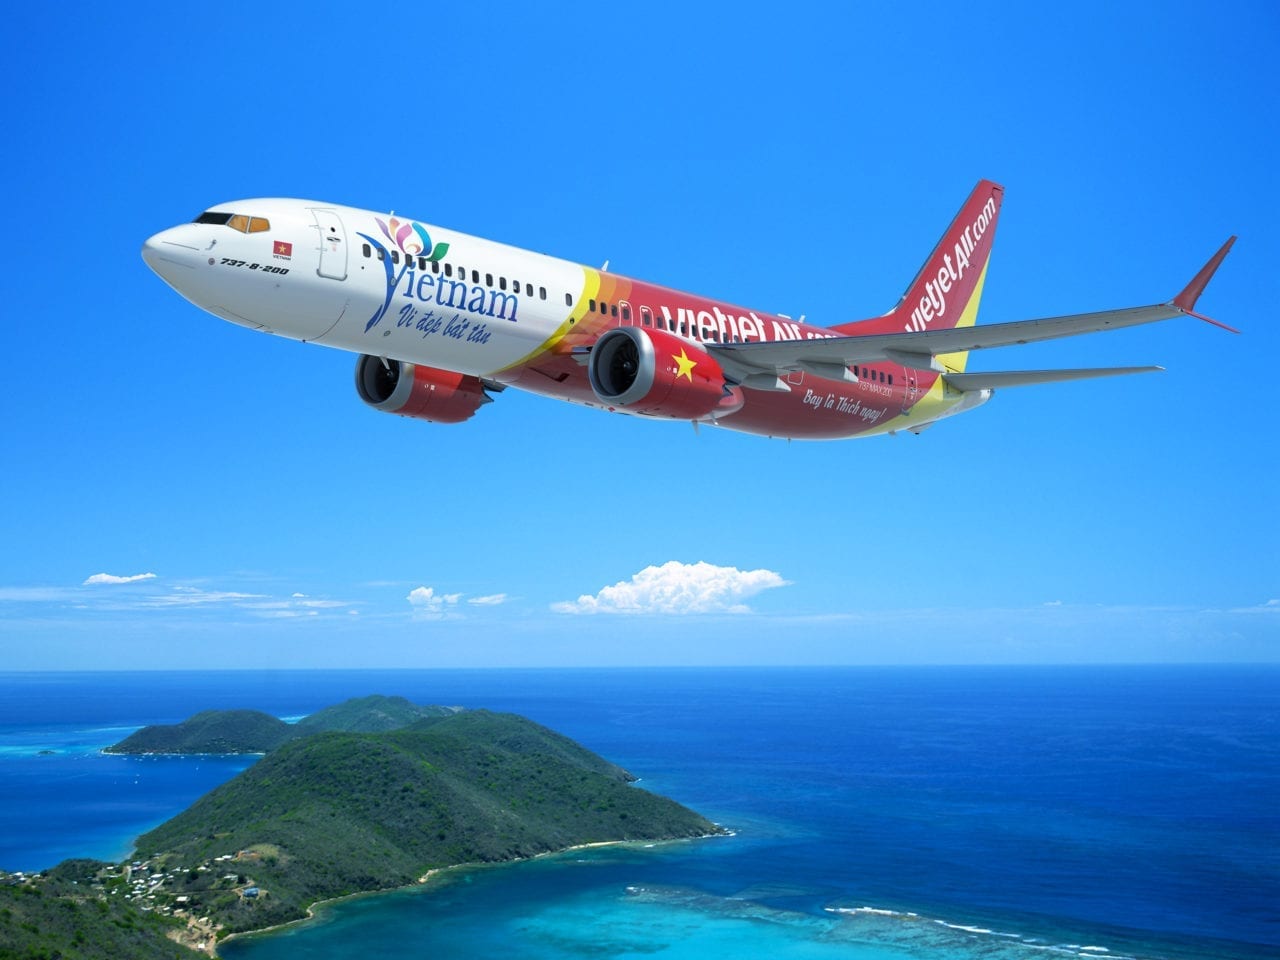 Soaring-above-the-sky-with-Vietjet-1280x960.jpg